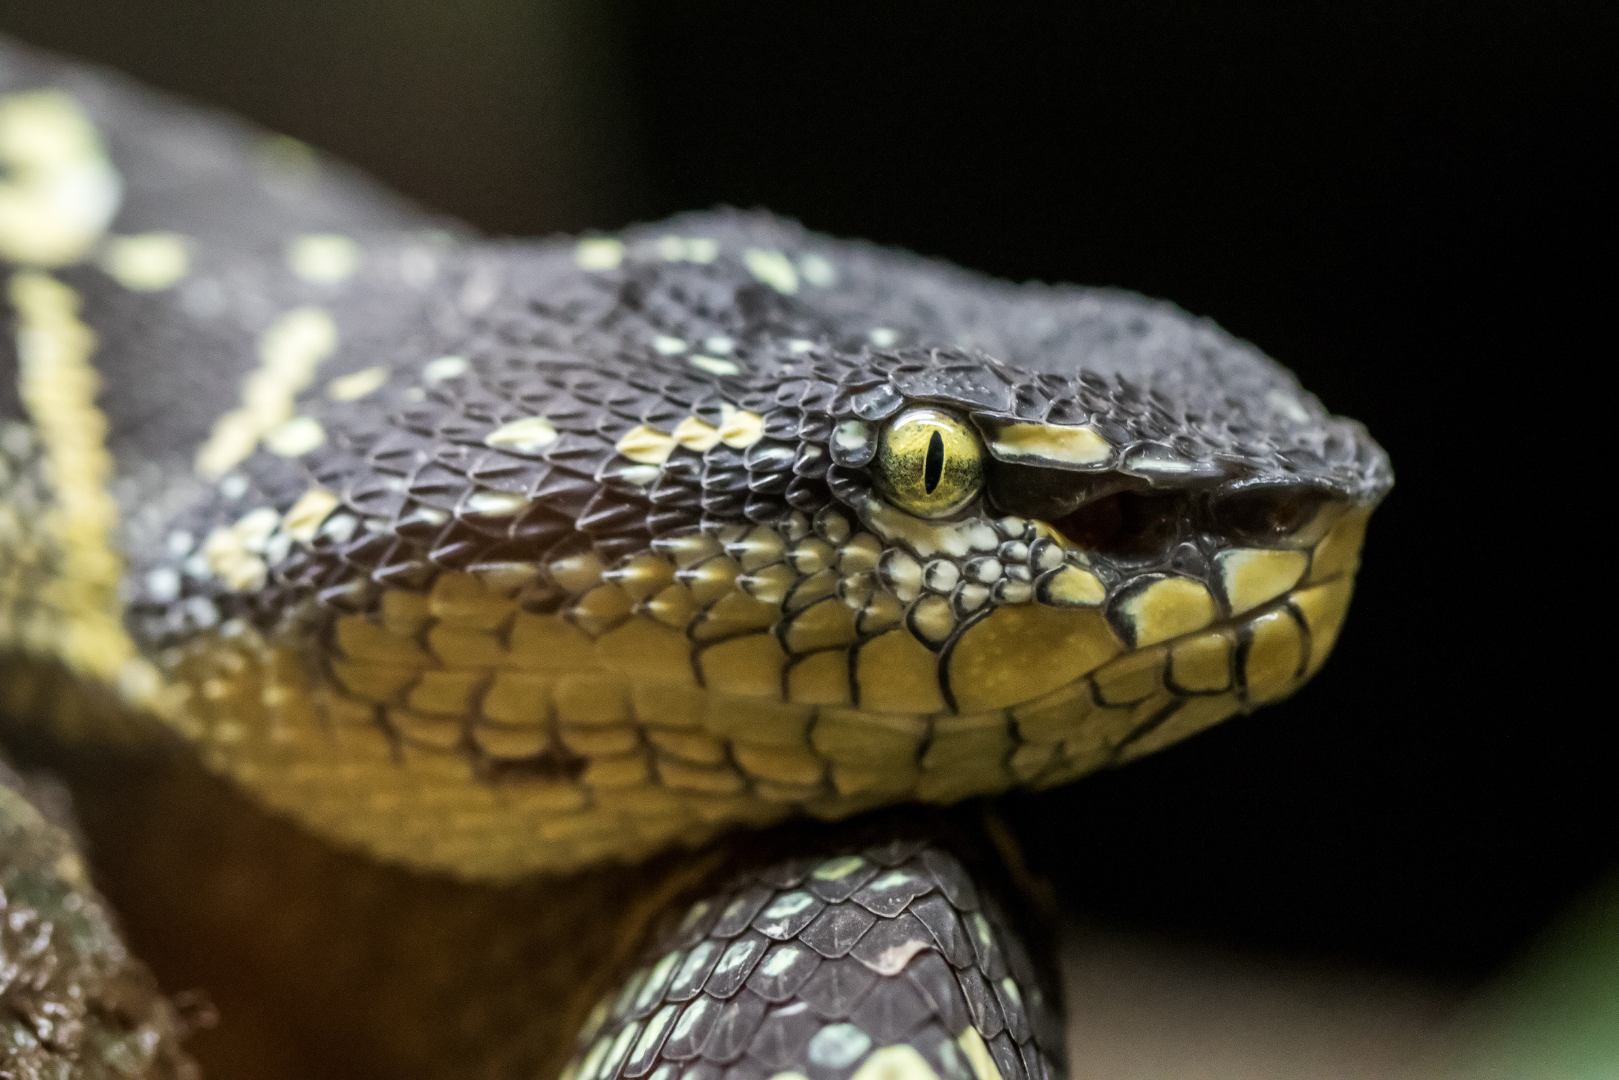 Venomous! New pit viper discovered in China